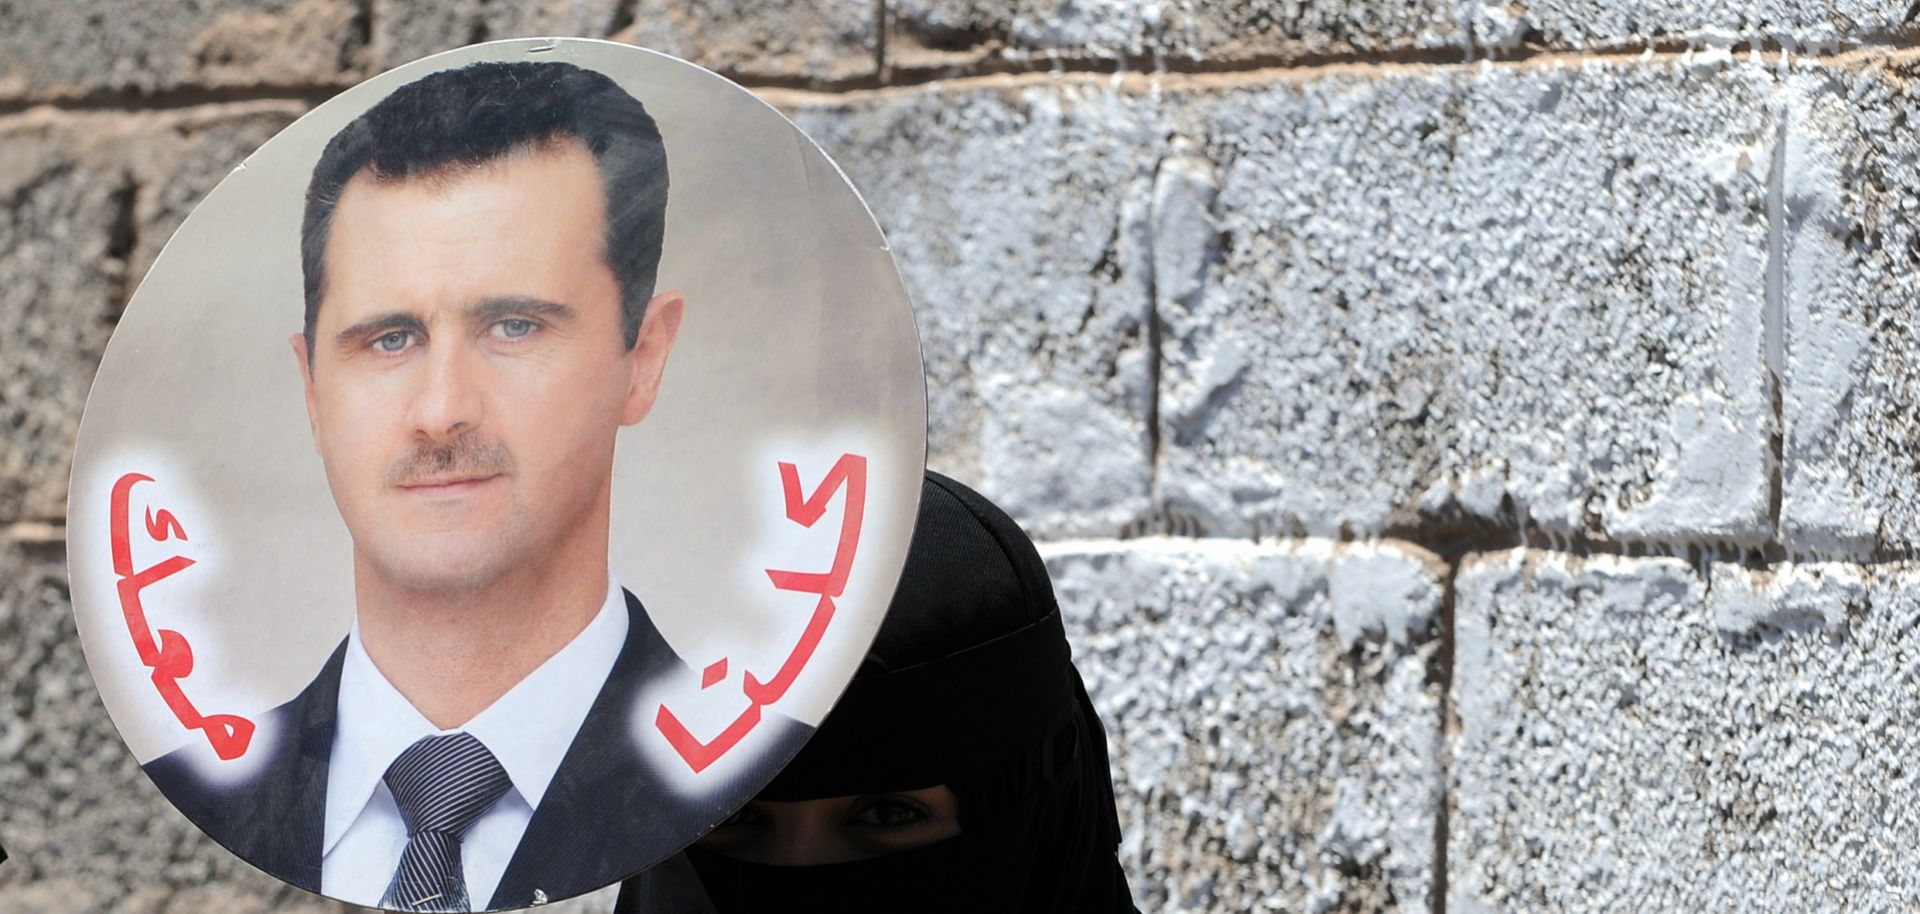 A Yemeni woman holds a photo of Syrian President Bashar al-Assad during a protest.